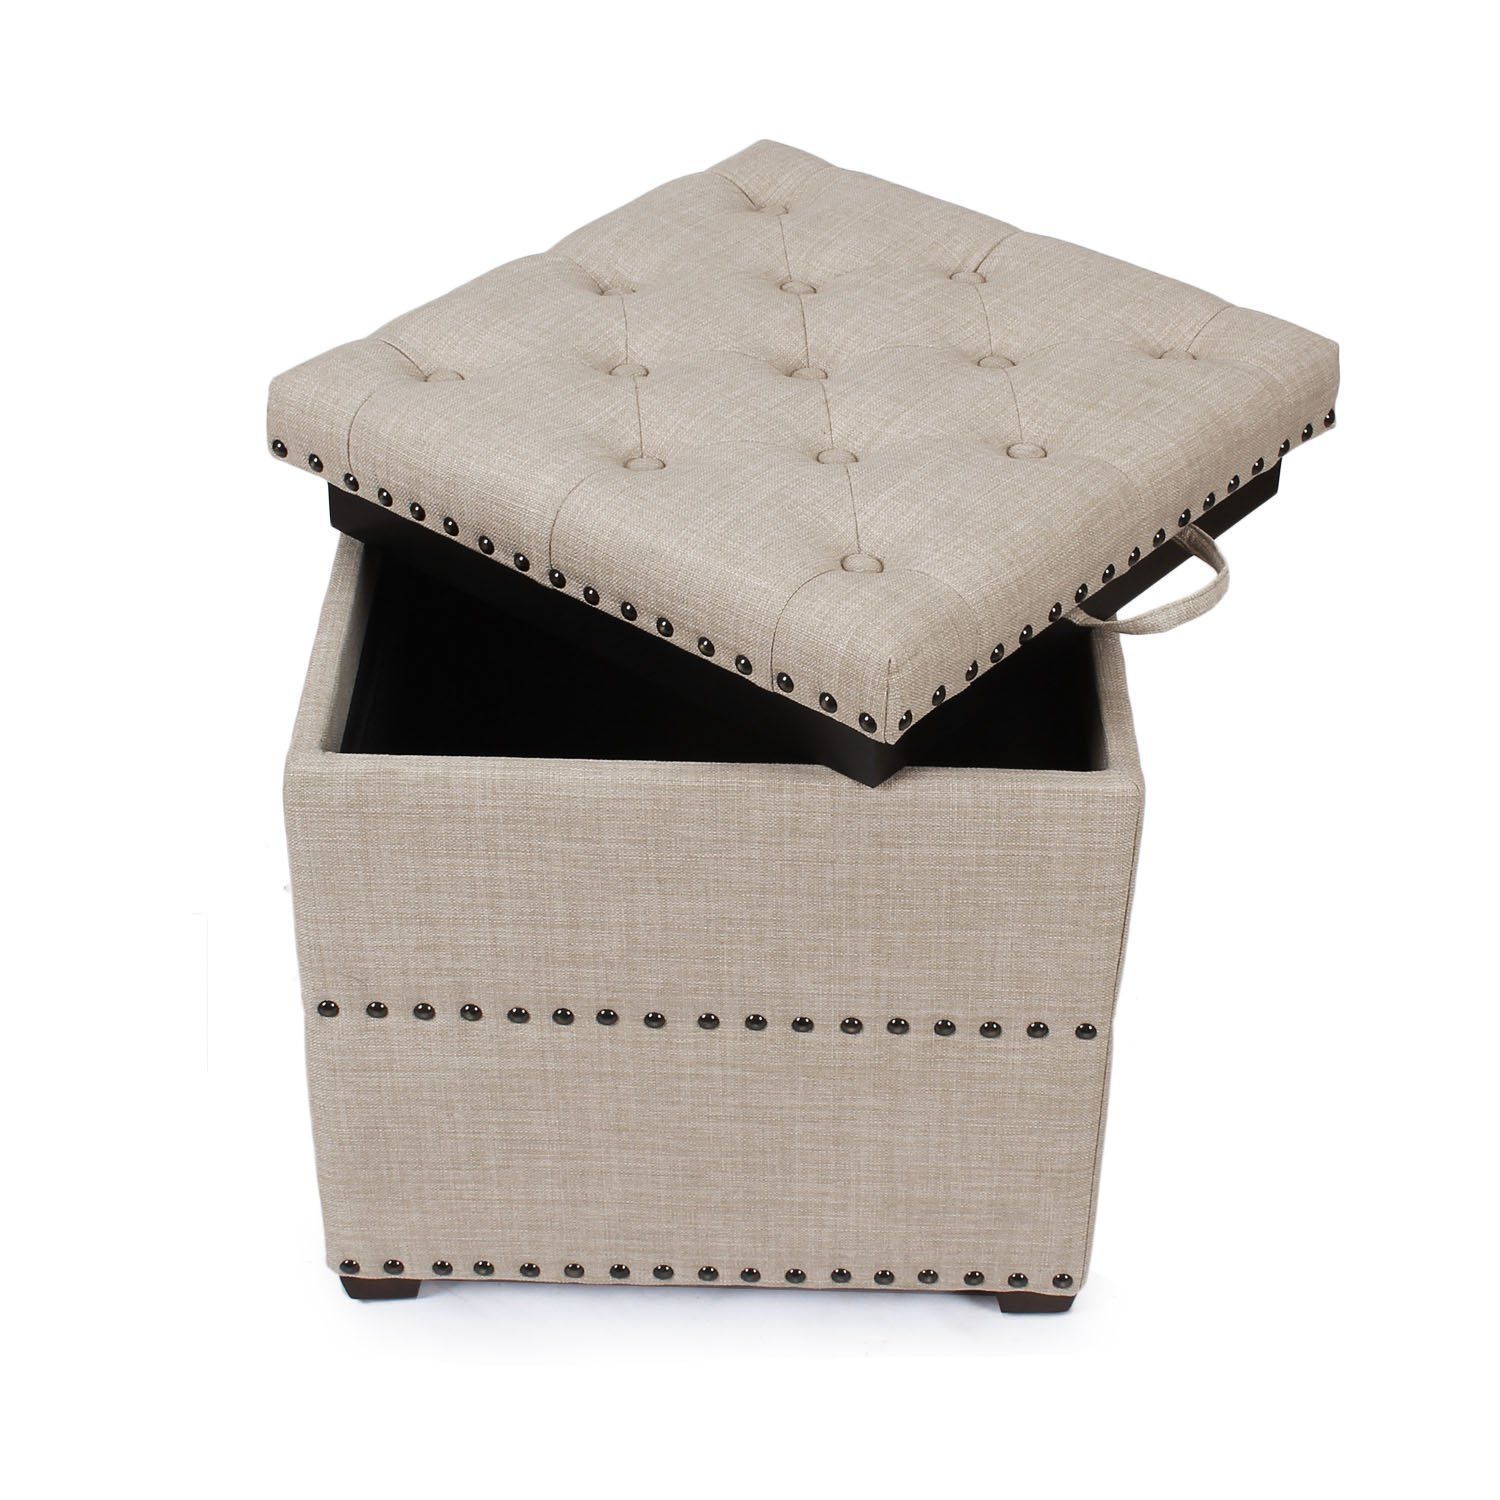 Ottoman Cube With Nailhead Trim | Tufted Storage Ottoman, Storage Within Lavender Fabric Storage Ottomans (View 12 of 20)